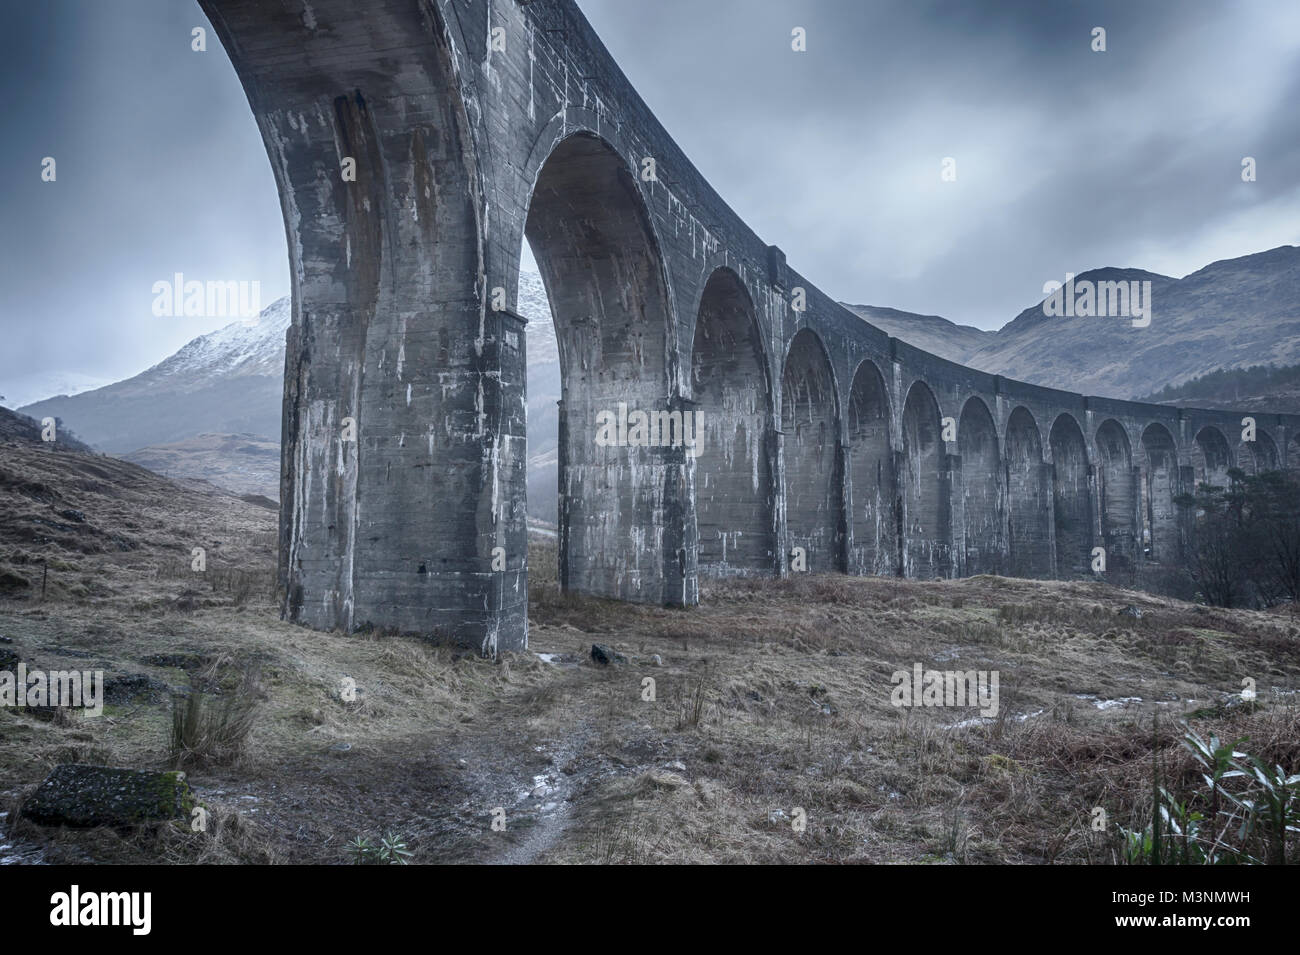 The 21 arches of the Glenfinnan Viaduct carry the West Highland Railway Line across Glenfinnan. The viaduct overlooks the Glennfinnan Monument and Loc Stock Photo